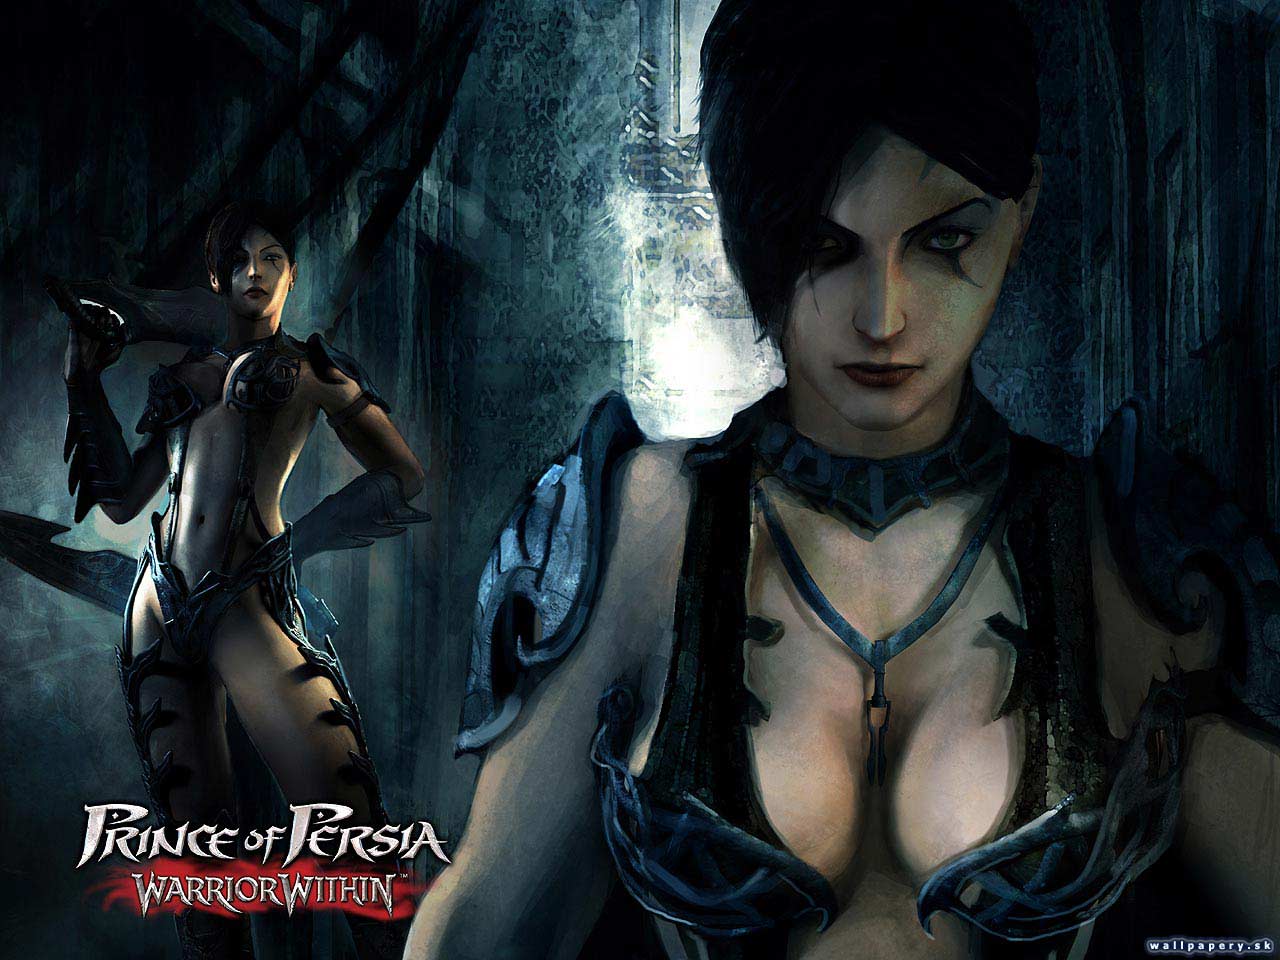 Prince of Persia: Warrior Within - wallpaper 3